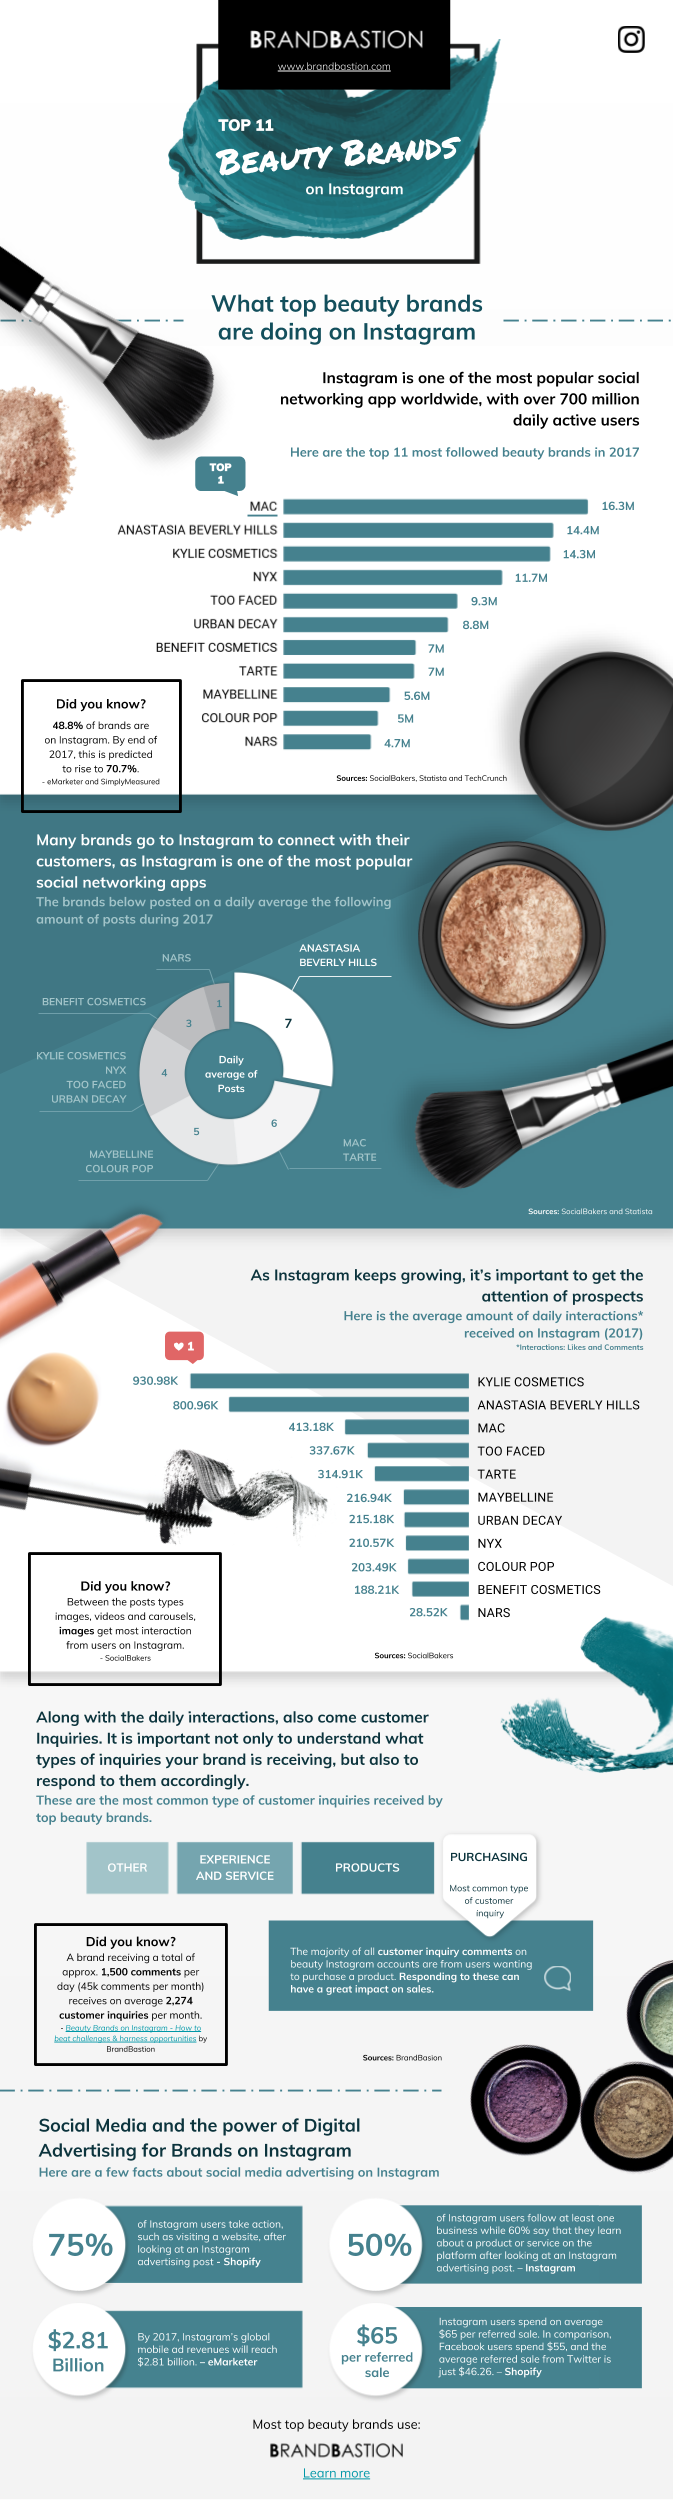 What top beauty brands are doing on Instagram - Full Infographic Report